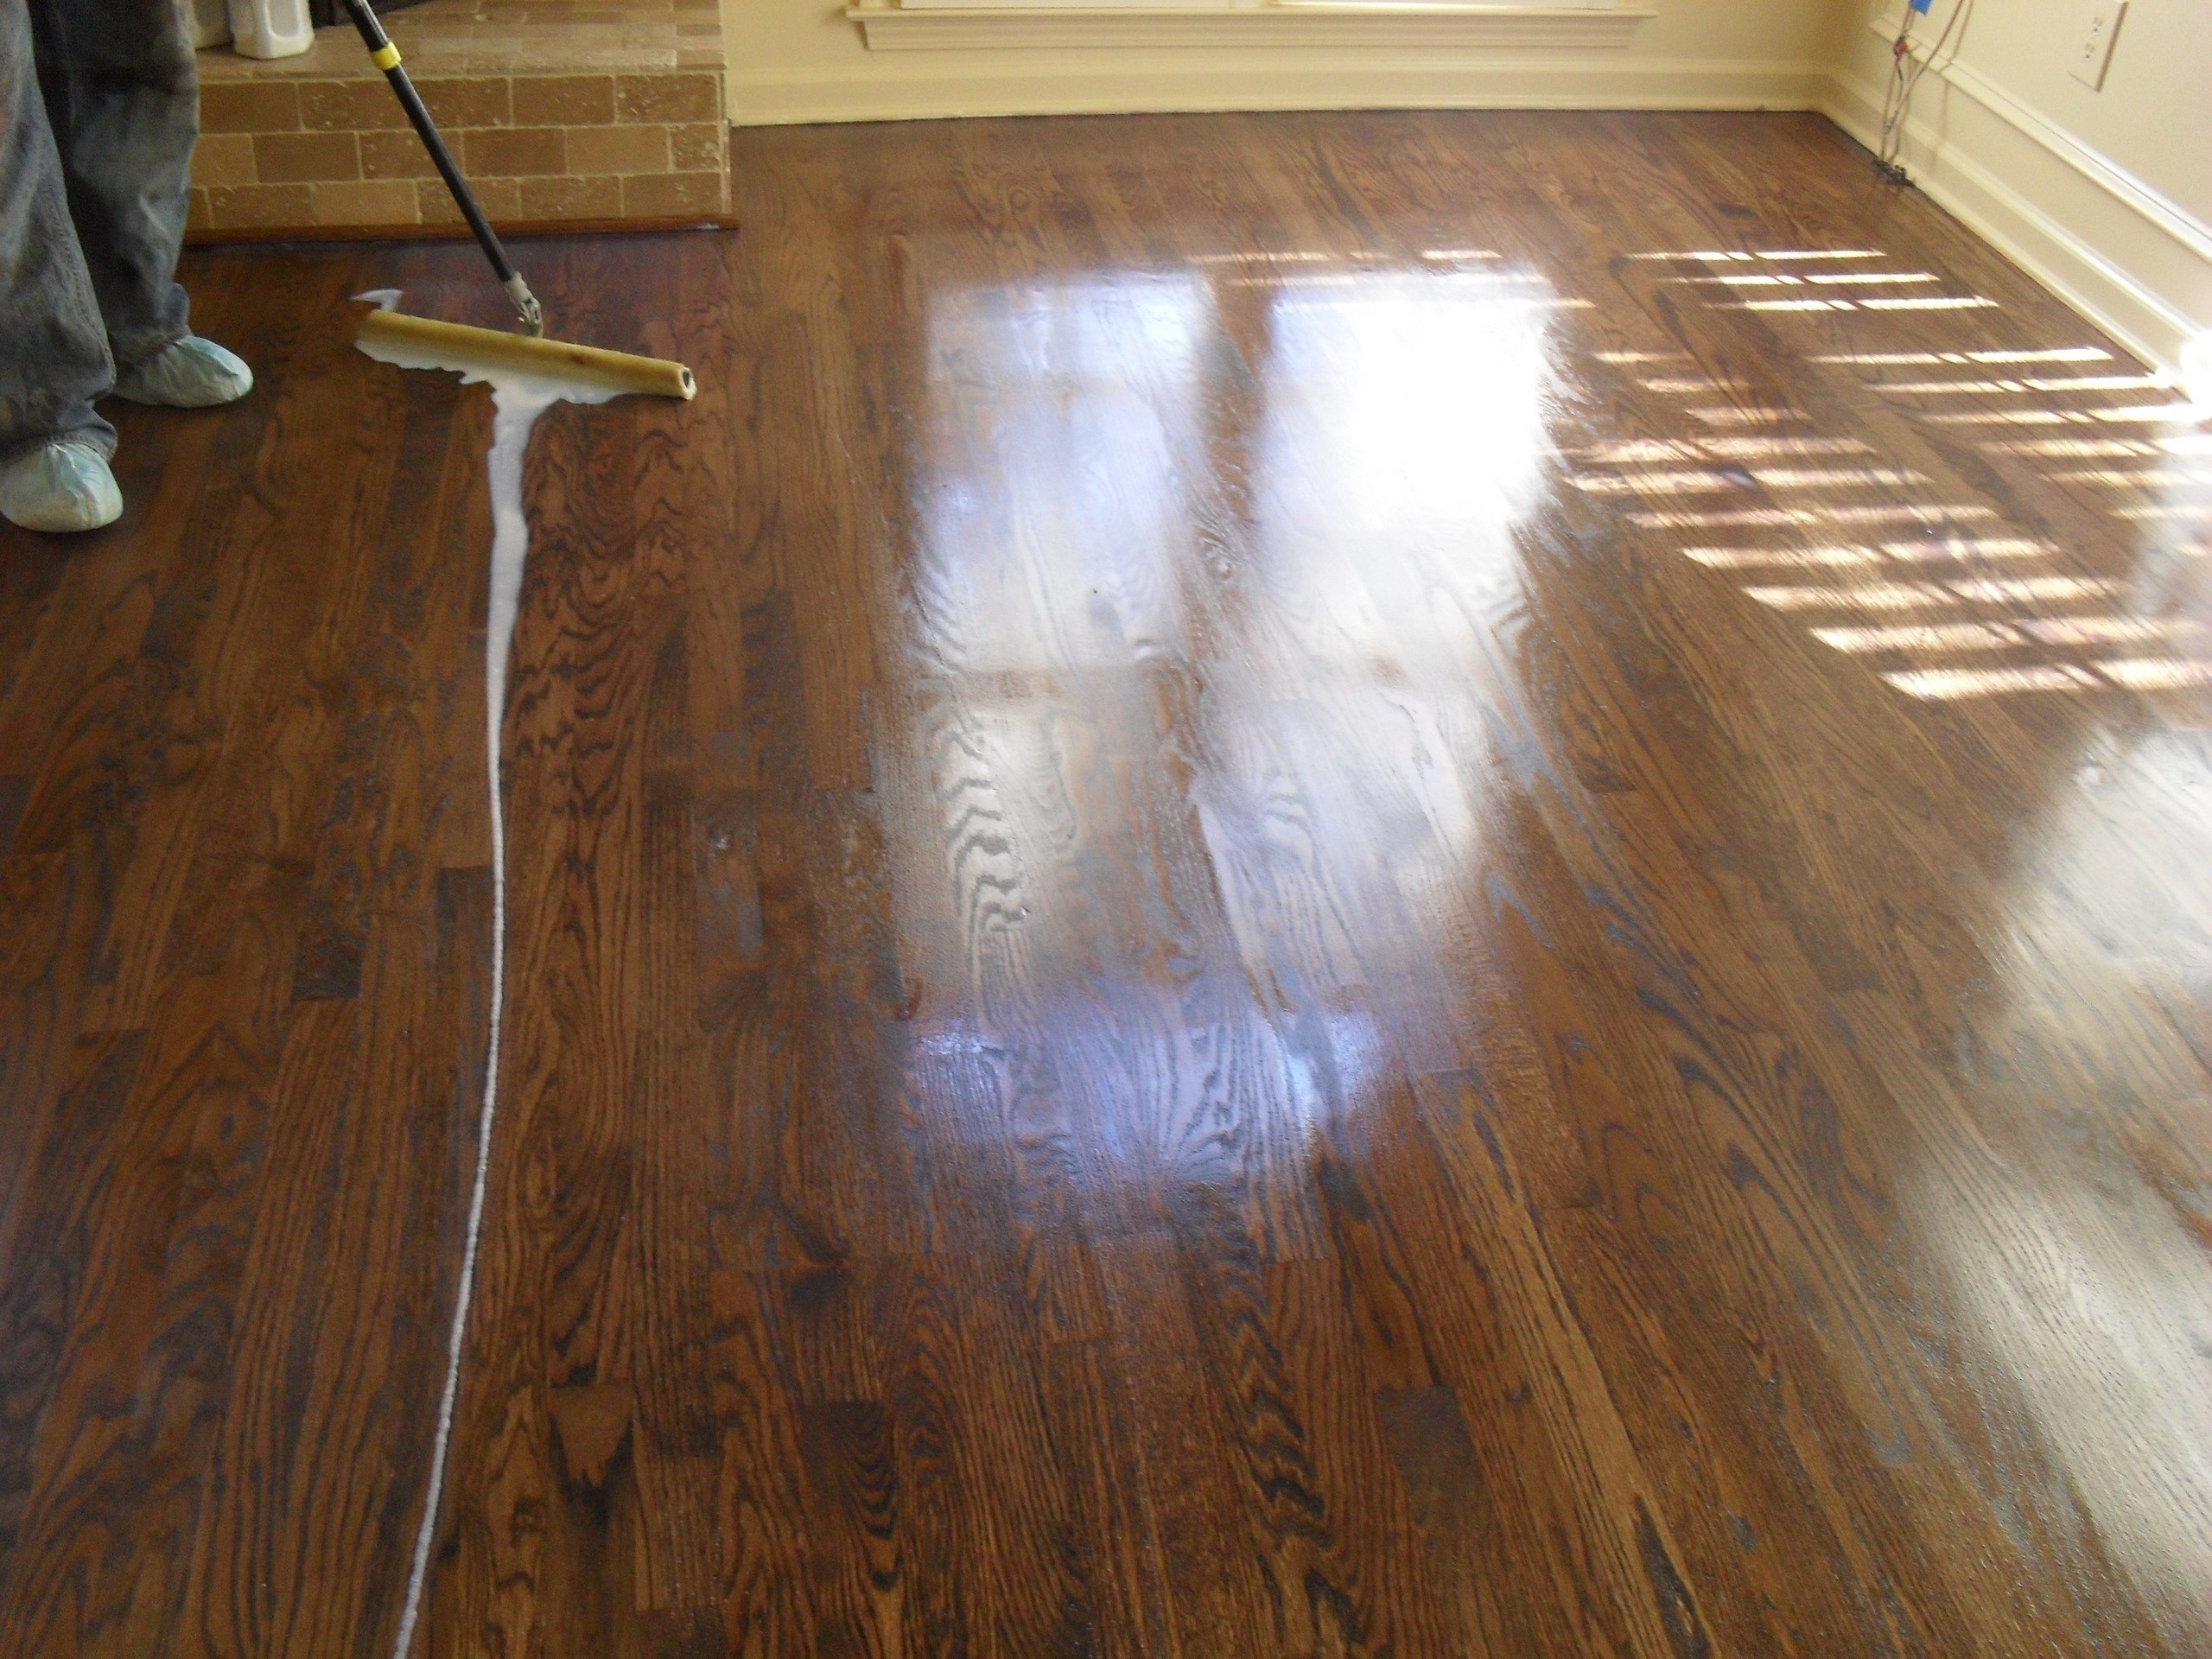 12 Wonderful Stained Hardwood Floors Pictures 2023 free download stained hardwood floors pictures of how to refinish a wood floor sand and stain hardwood floors cost intended for how to refinish a wood floor sand and stain hardwood floors cost podemoslega